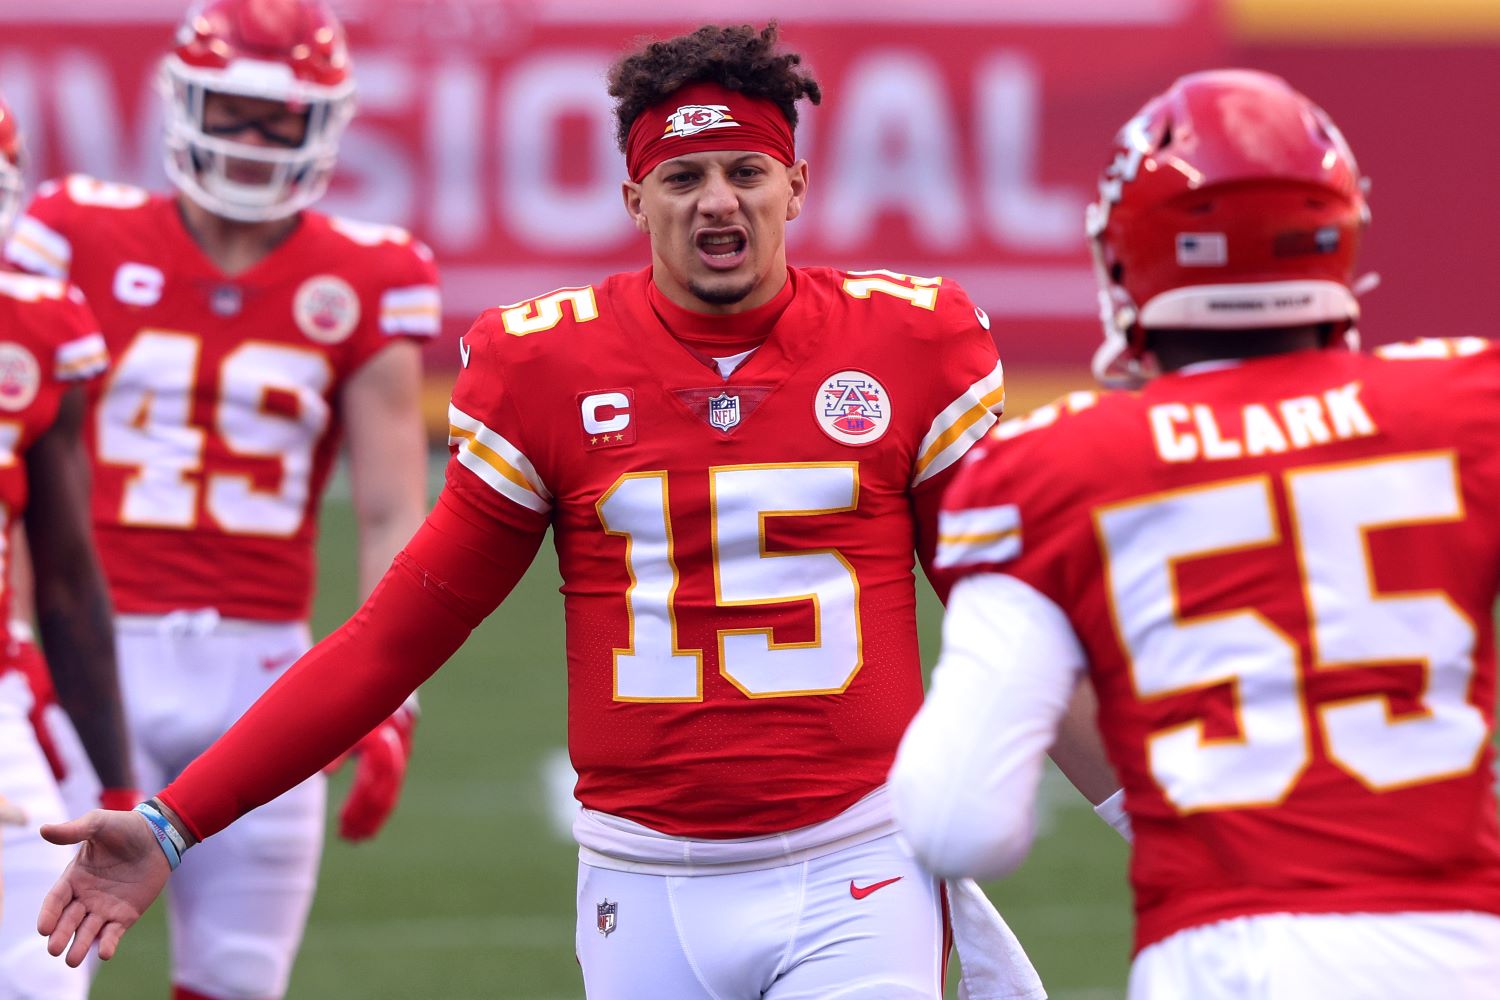 Patrick Mahomes just put all doubts to rest about his status for Sunday's AFC championship game showdown between the Chiefs and the Bills.